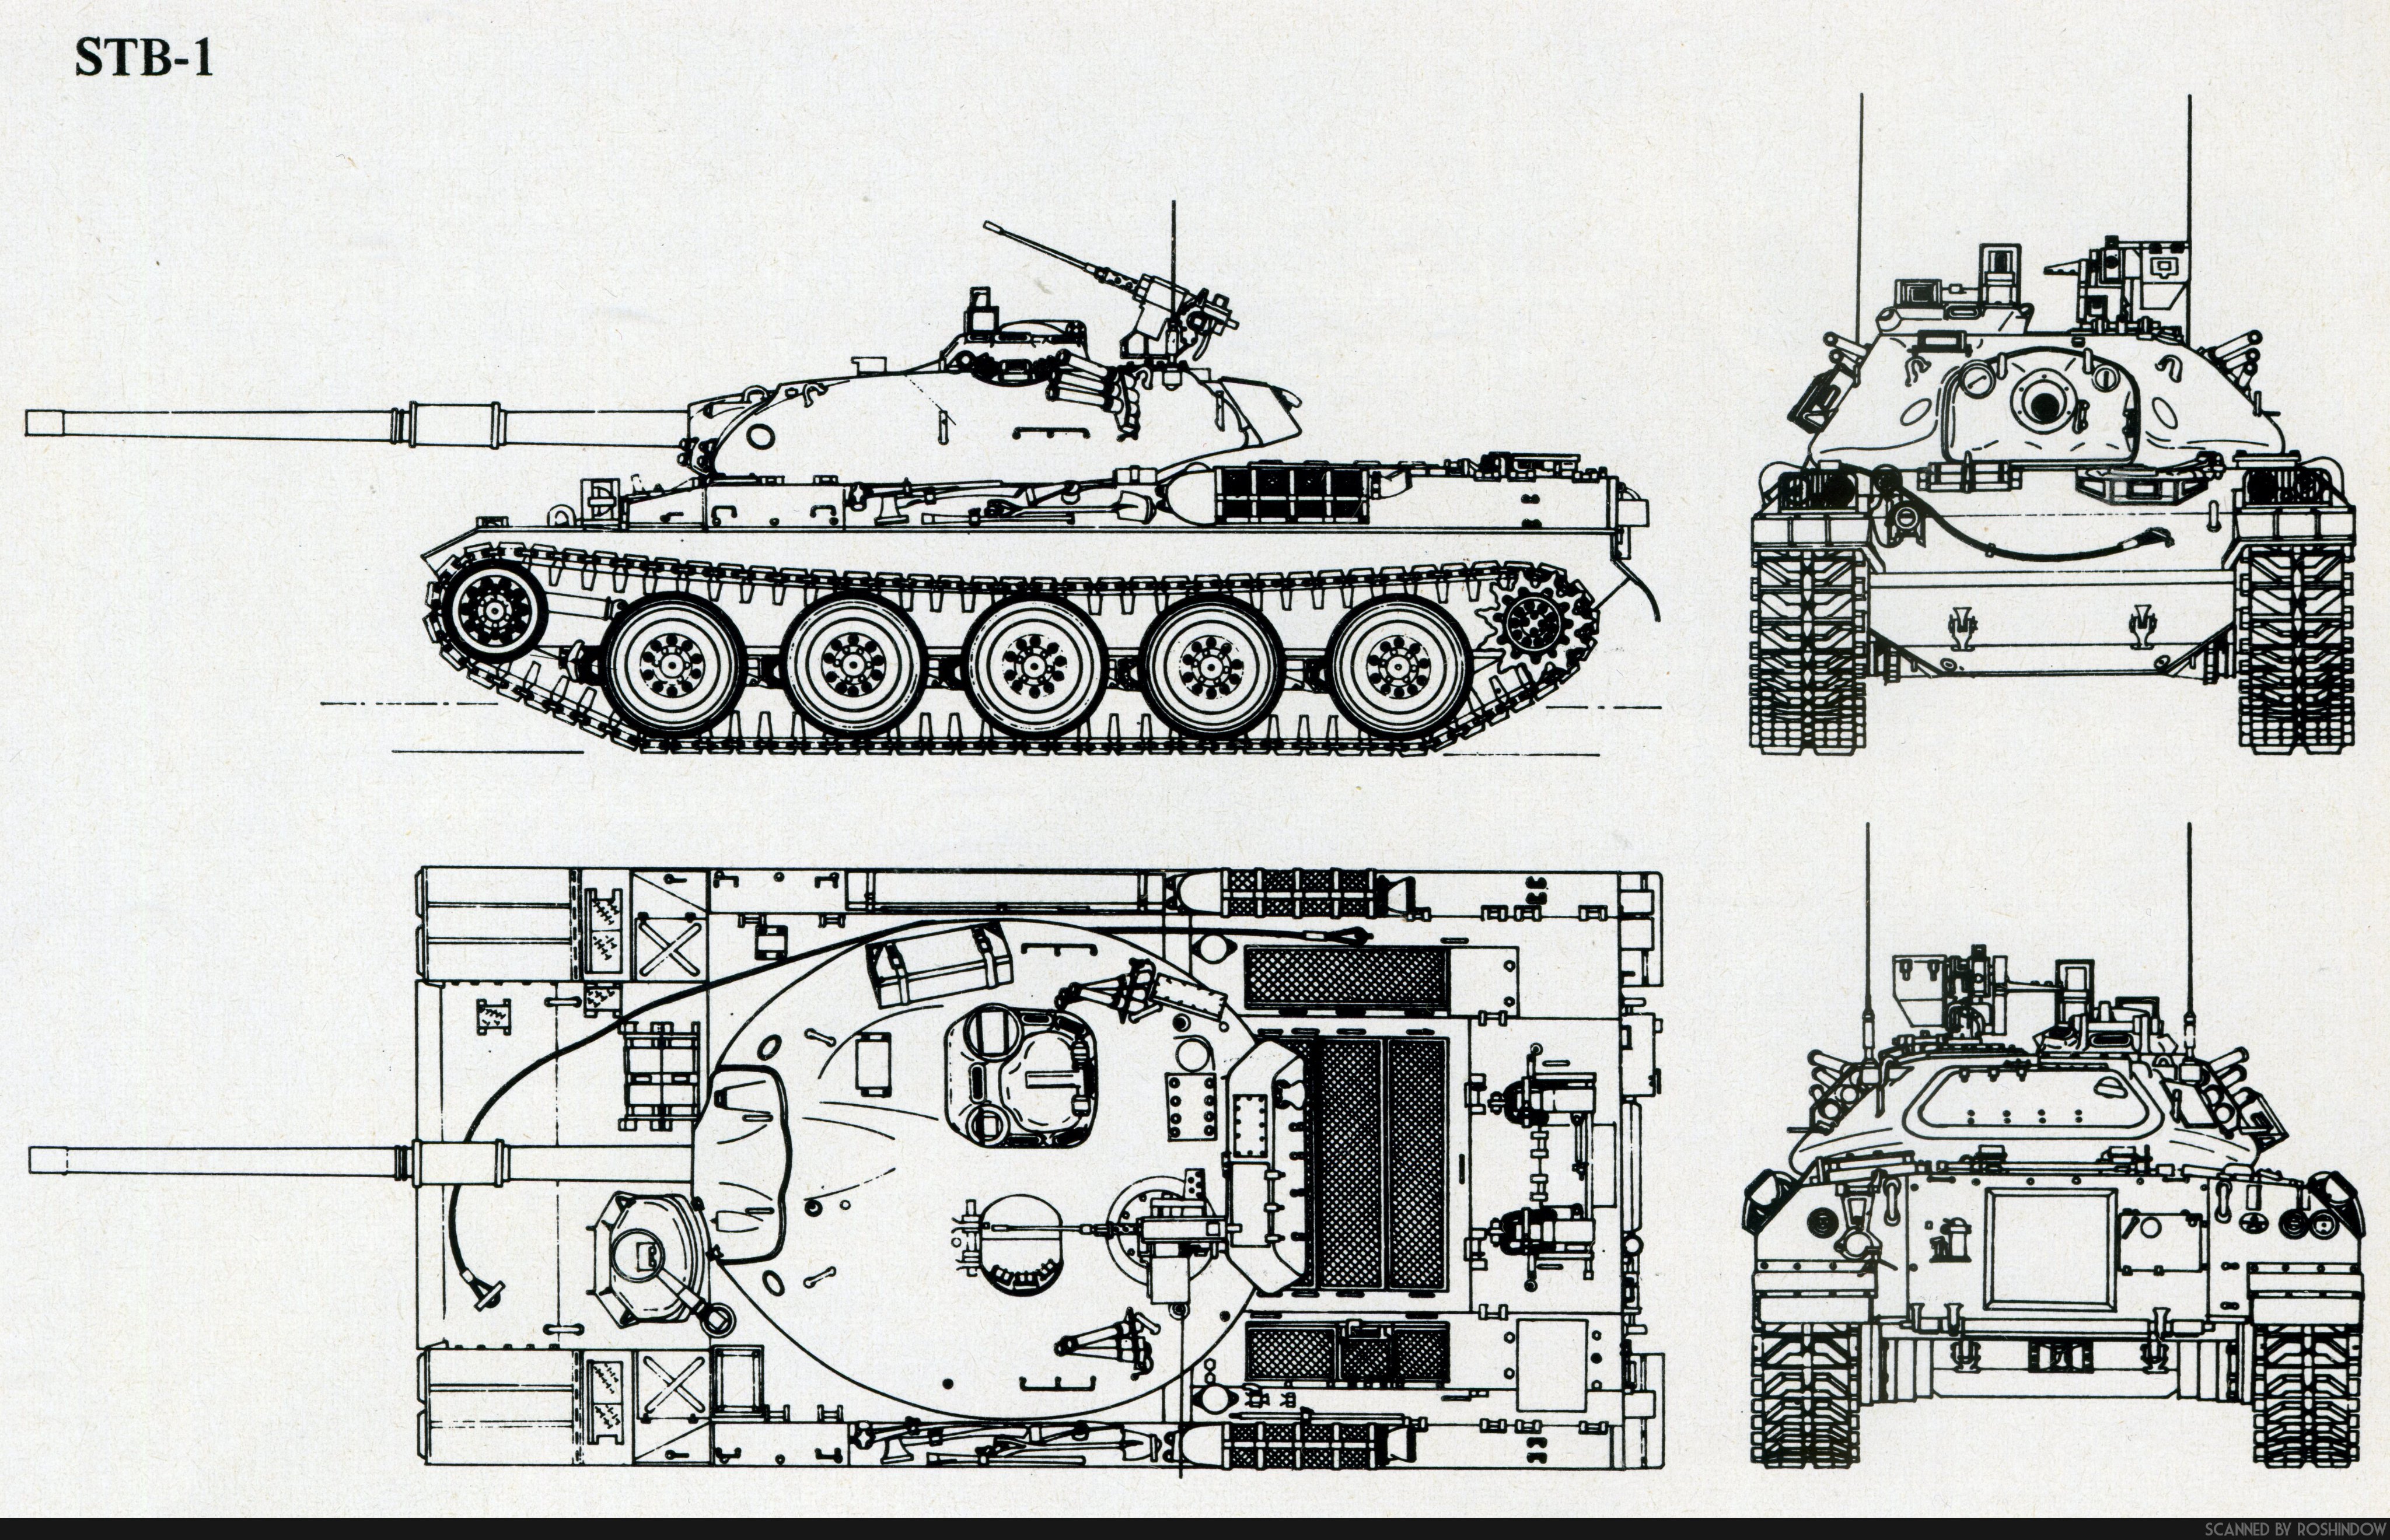 Nacional si Emulación Enrico Micheli - Roshindow Twitterren: "And finally comparison drawings  between STB-1 and STB-3. While published in "Eserciti e Army" these  drawings come from the Japanese magazine "Panzer", which I do not posses,